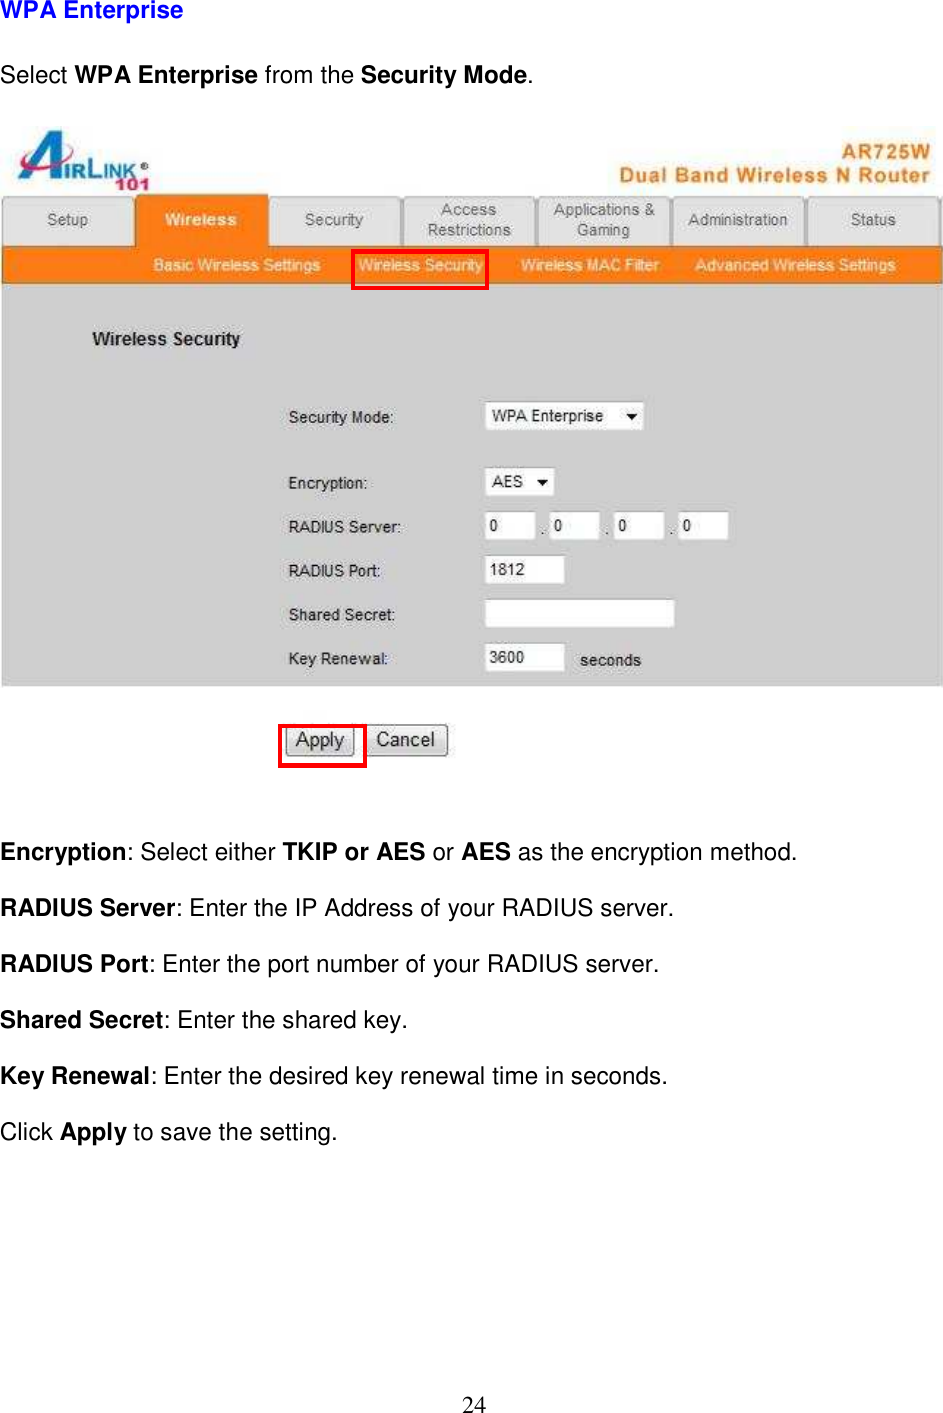 24 WPA Enterprise  Select WPA Enterprise from the Security Mode.     Encryption: Select either TKIP or AES or AES as the encryption method.  RADIUS Server: Enter the IP Address of your RADIUS server.  RADIUS Port: Enter the port number of your RADIUS server.  Shared Secret: Enter the shared key.  Key Renewal: Enter the desired key renewal time in seconds.  Click Apply to save the setting.         